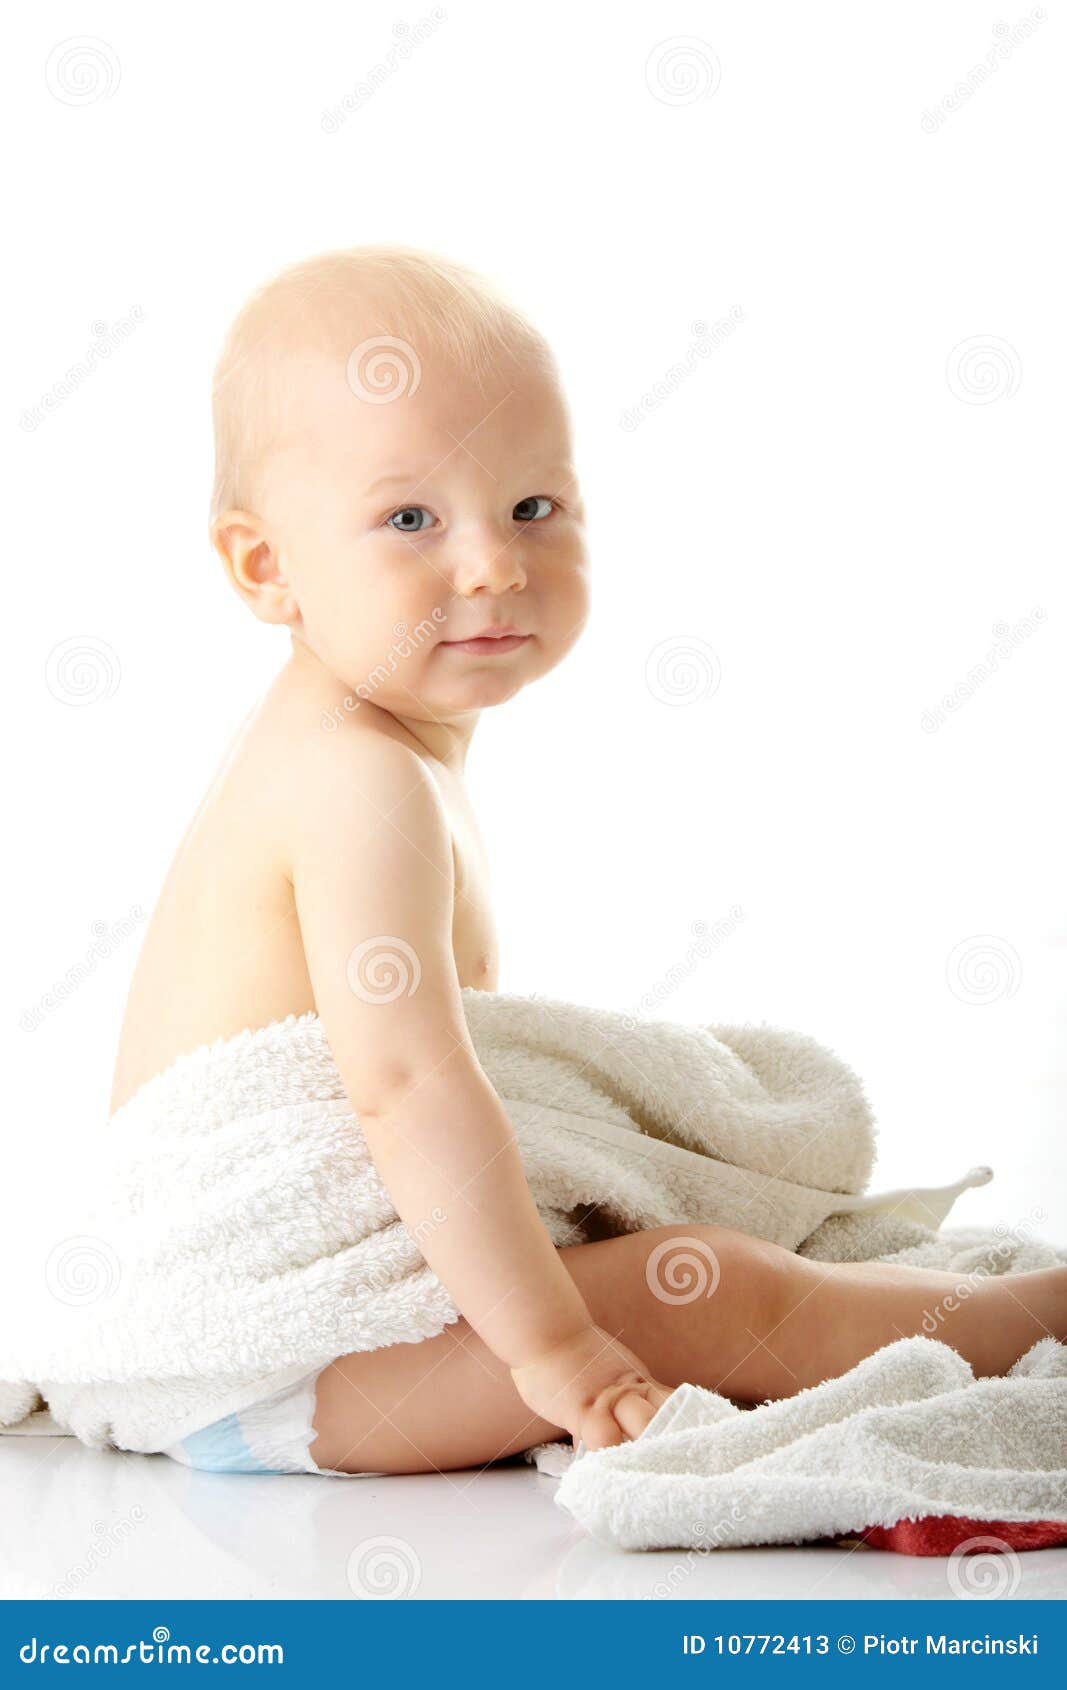 Baby after bath. stock image. Image of beauty, infant - 10772413